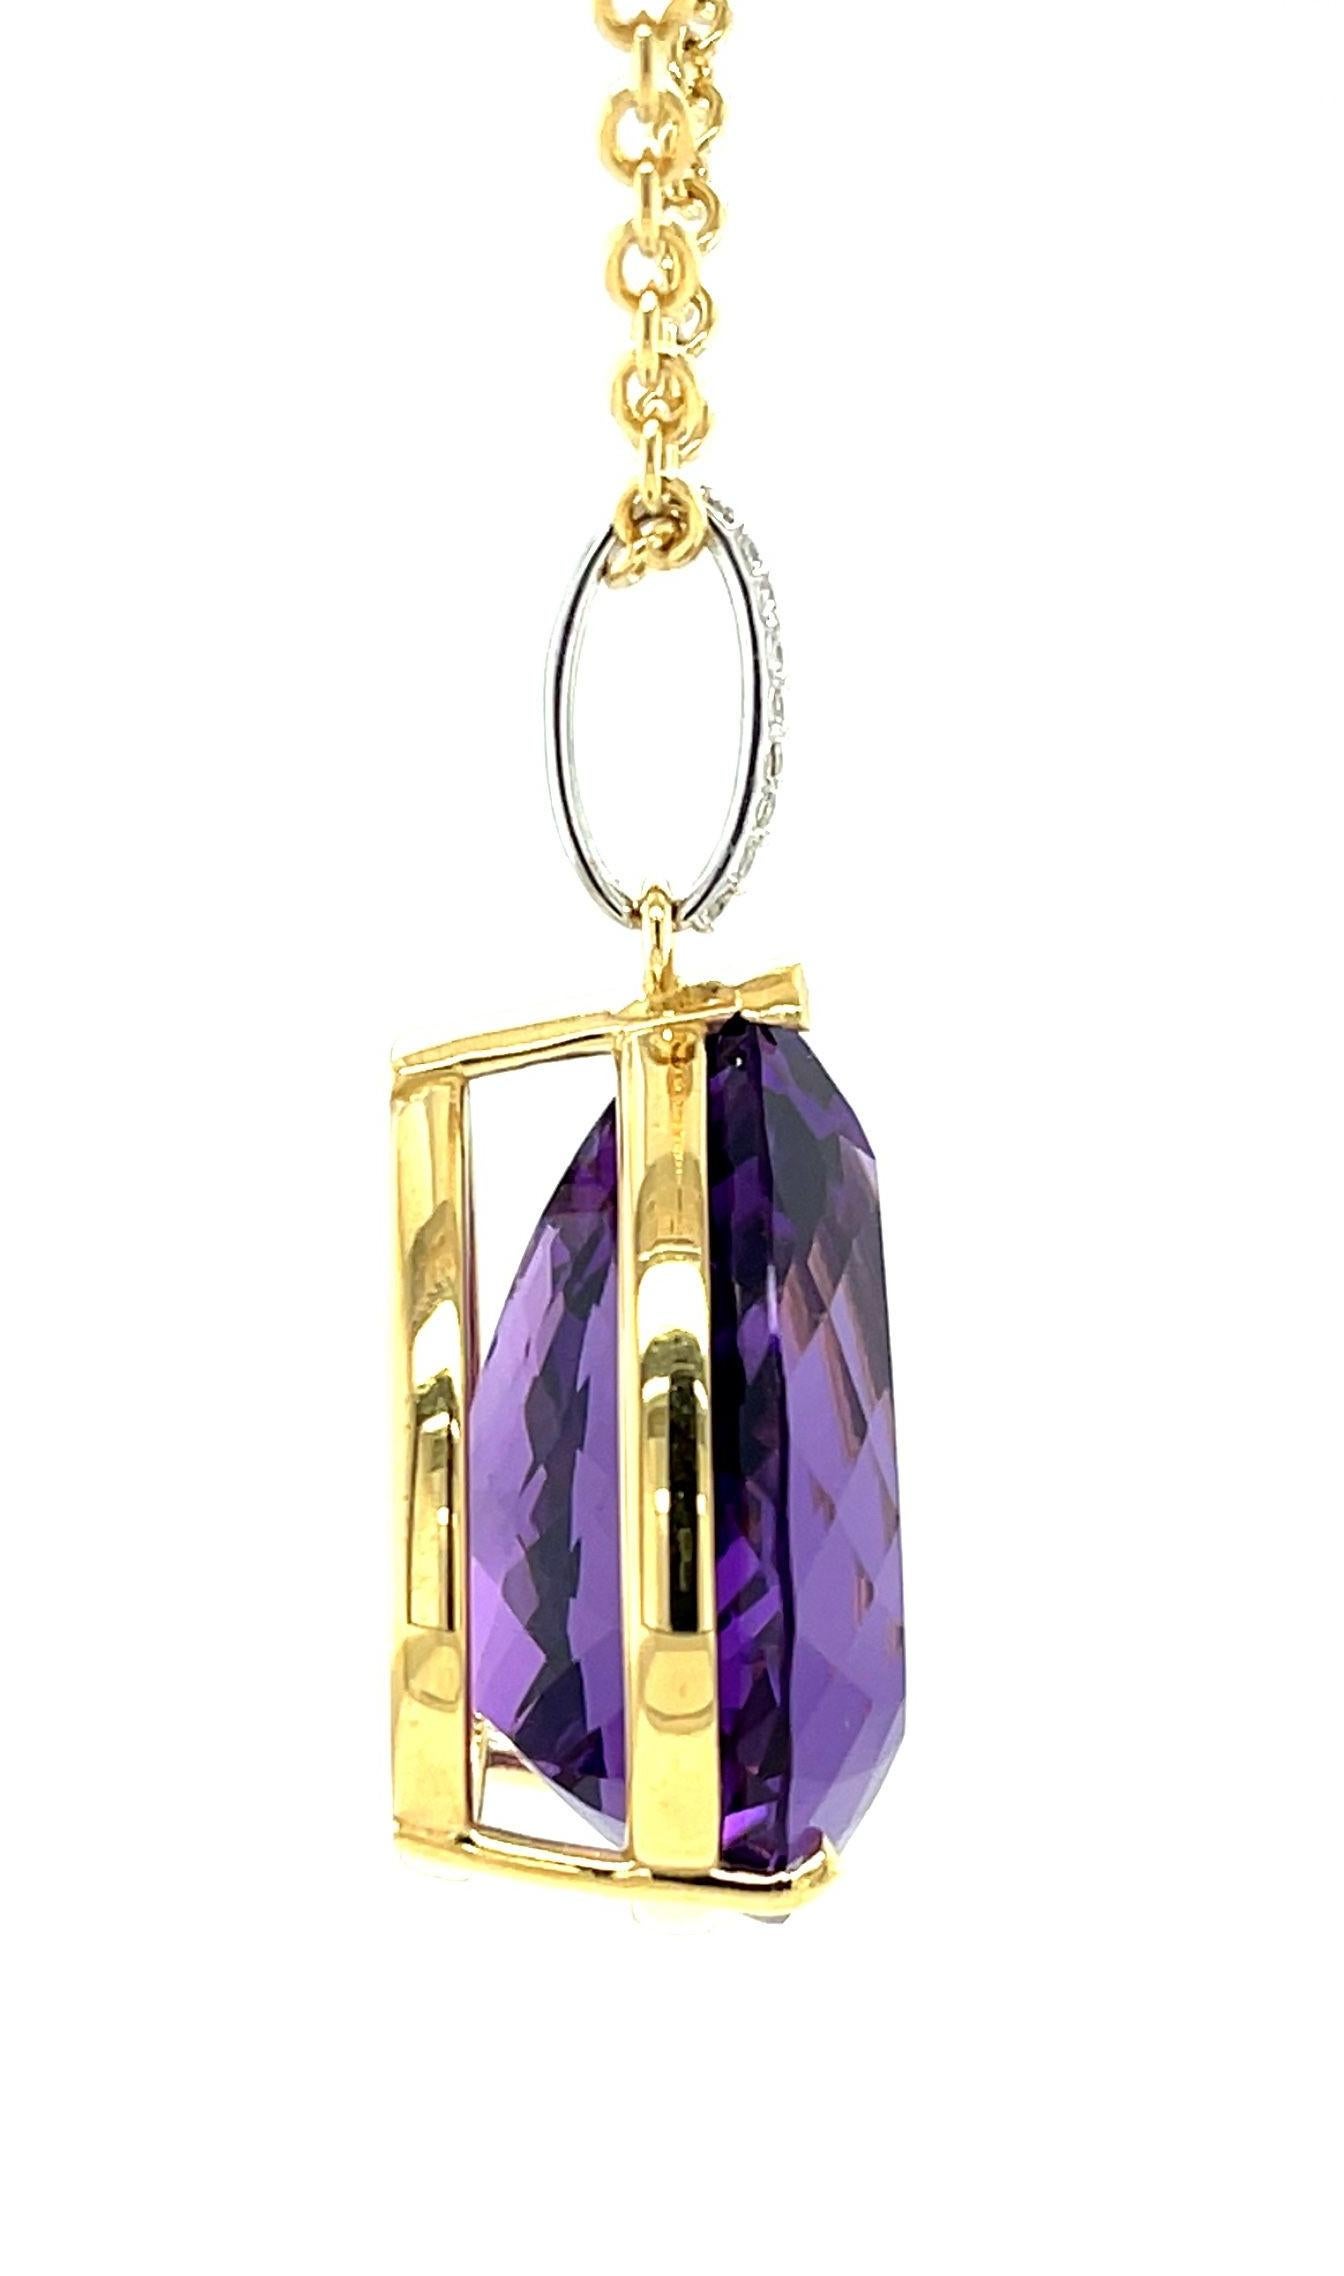 Artisan 40 Carat Pear Shape Amethyst and Diamond Pendant in 18k Yellow Gold with Chain For Sale